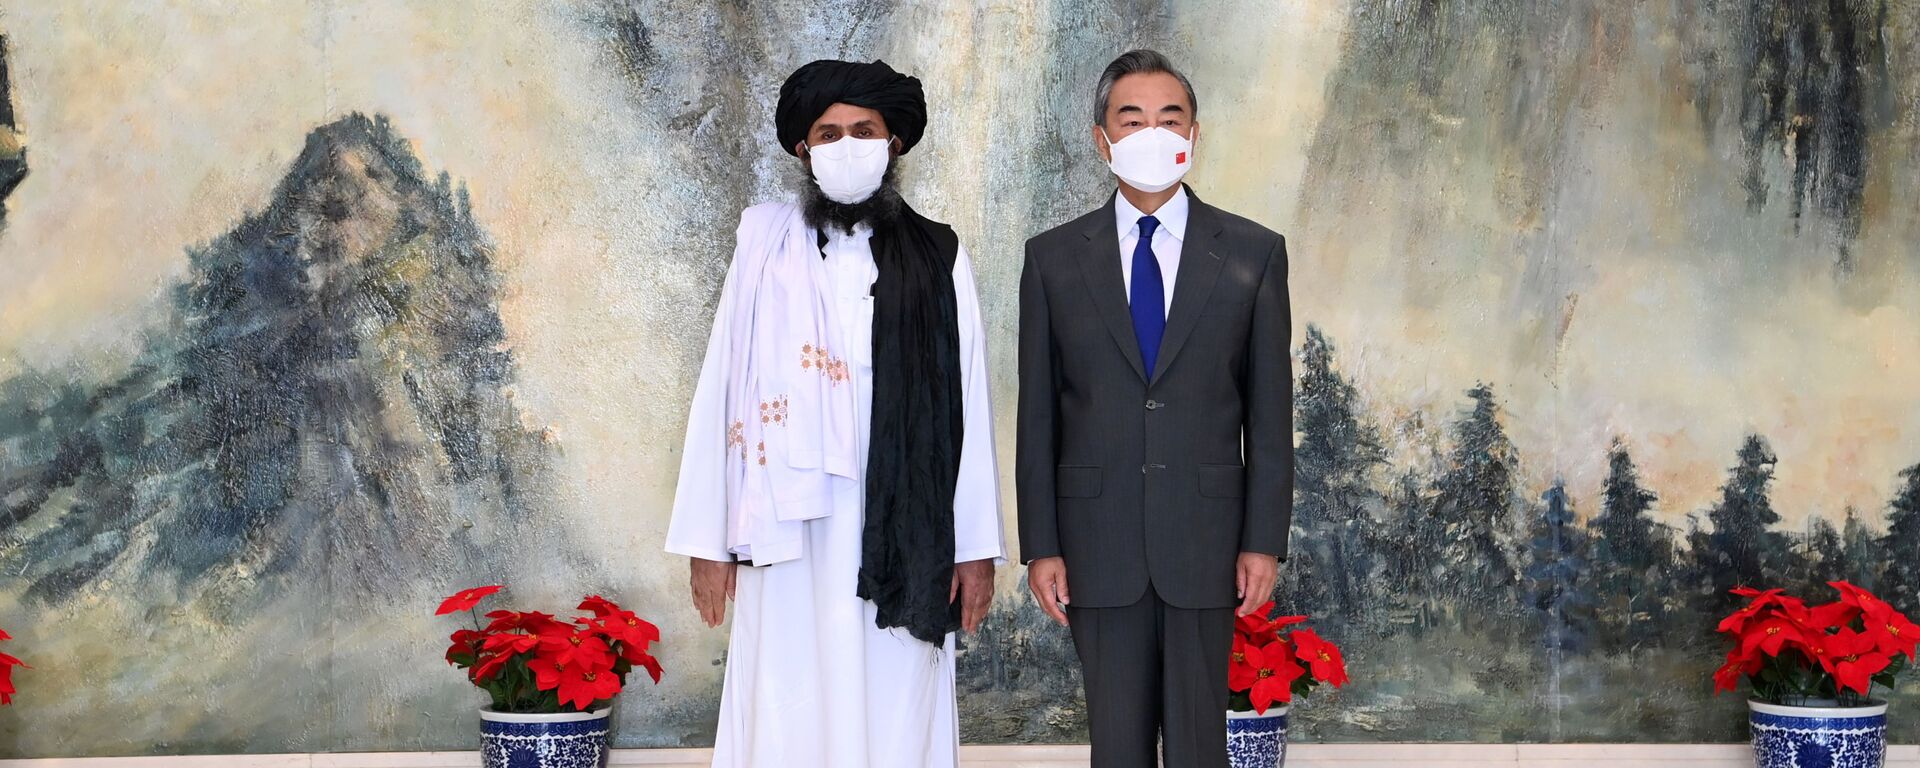 Chinese State Councilor and Foreign Minister Wang Yi meets with Mullah Abdul Ghani Baradar, political chief of Afghanistan's Taliban, in Tianjin, China July 28, 2021. Picture taken July 28, 2021. - Sputnik International, 1920, 30.08.2021